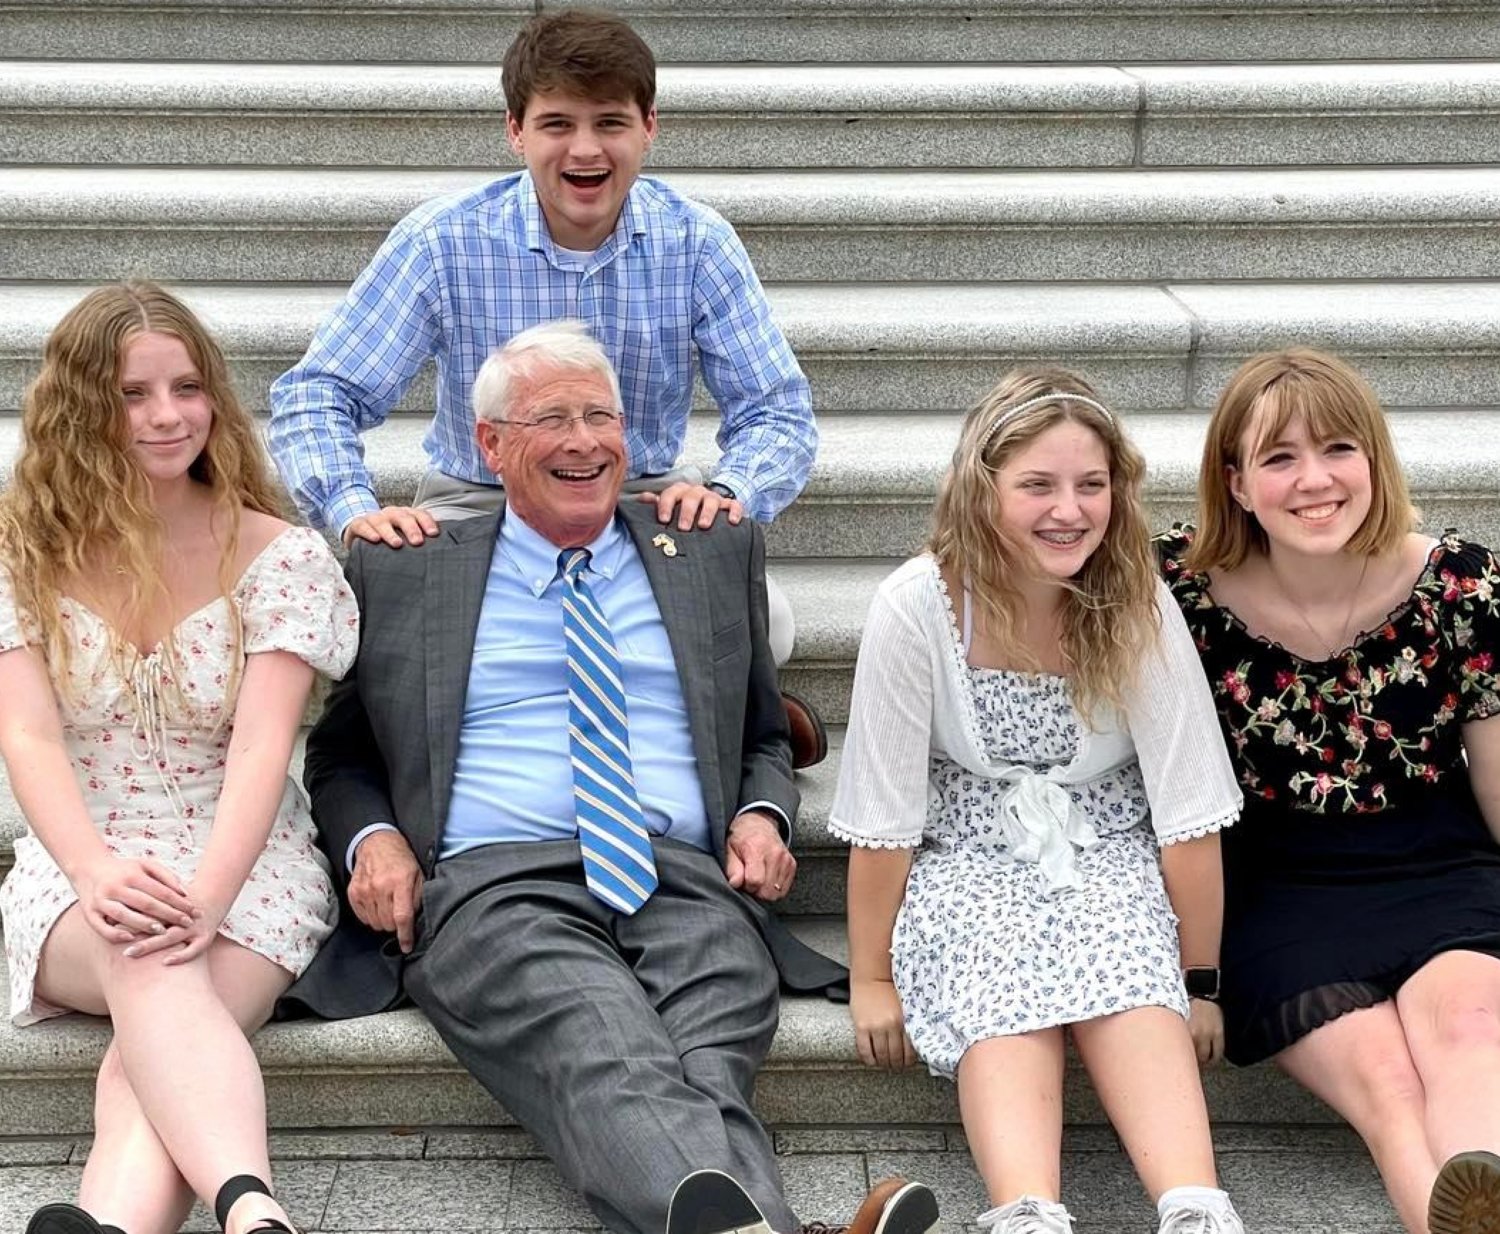 Germantown students pose with Sen. Roger Wicker while in Washington, D.C. for the National Catholic Forensic League Tournament. Pictured, from left: Gracie Houpt, Sen. Roger Wicker, Cade Weathersby, Julia Lever, and Ashley Lofton.